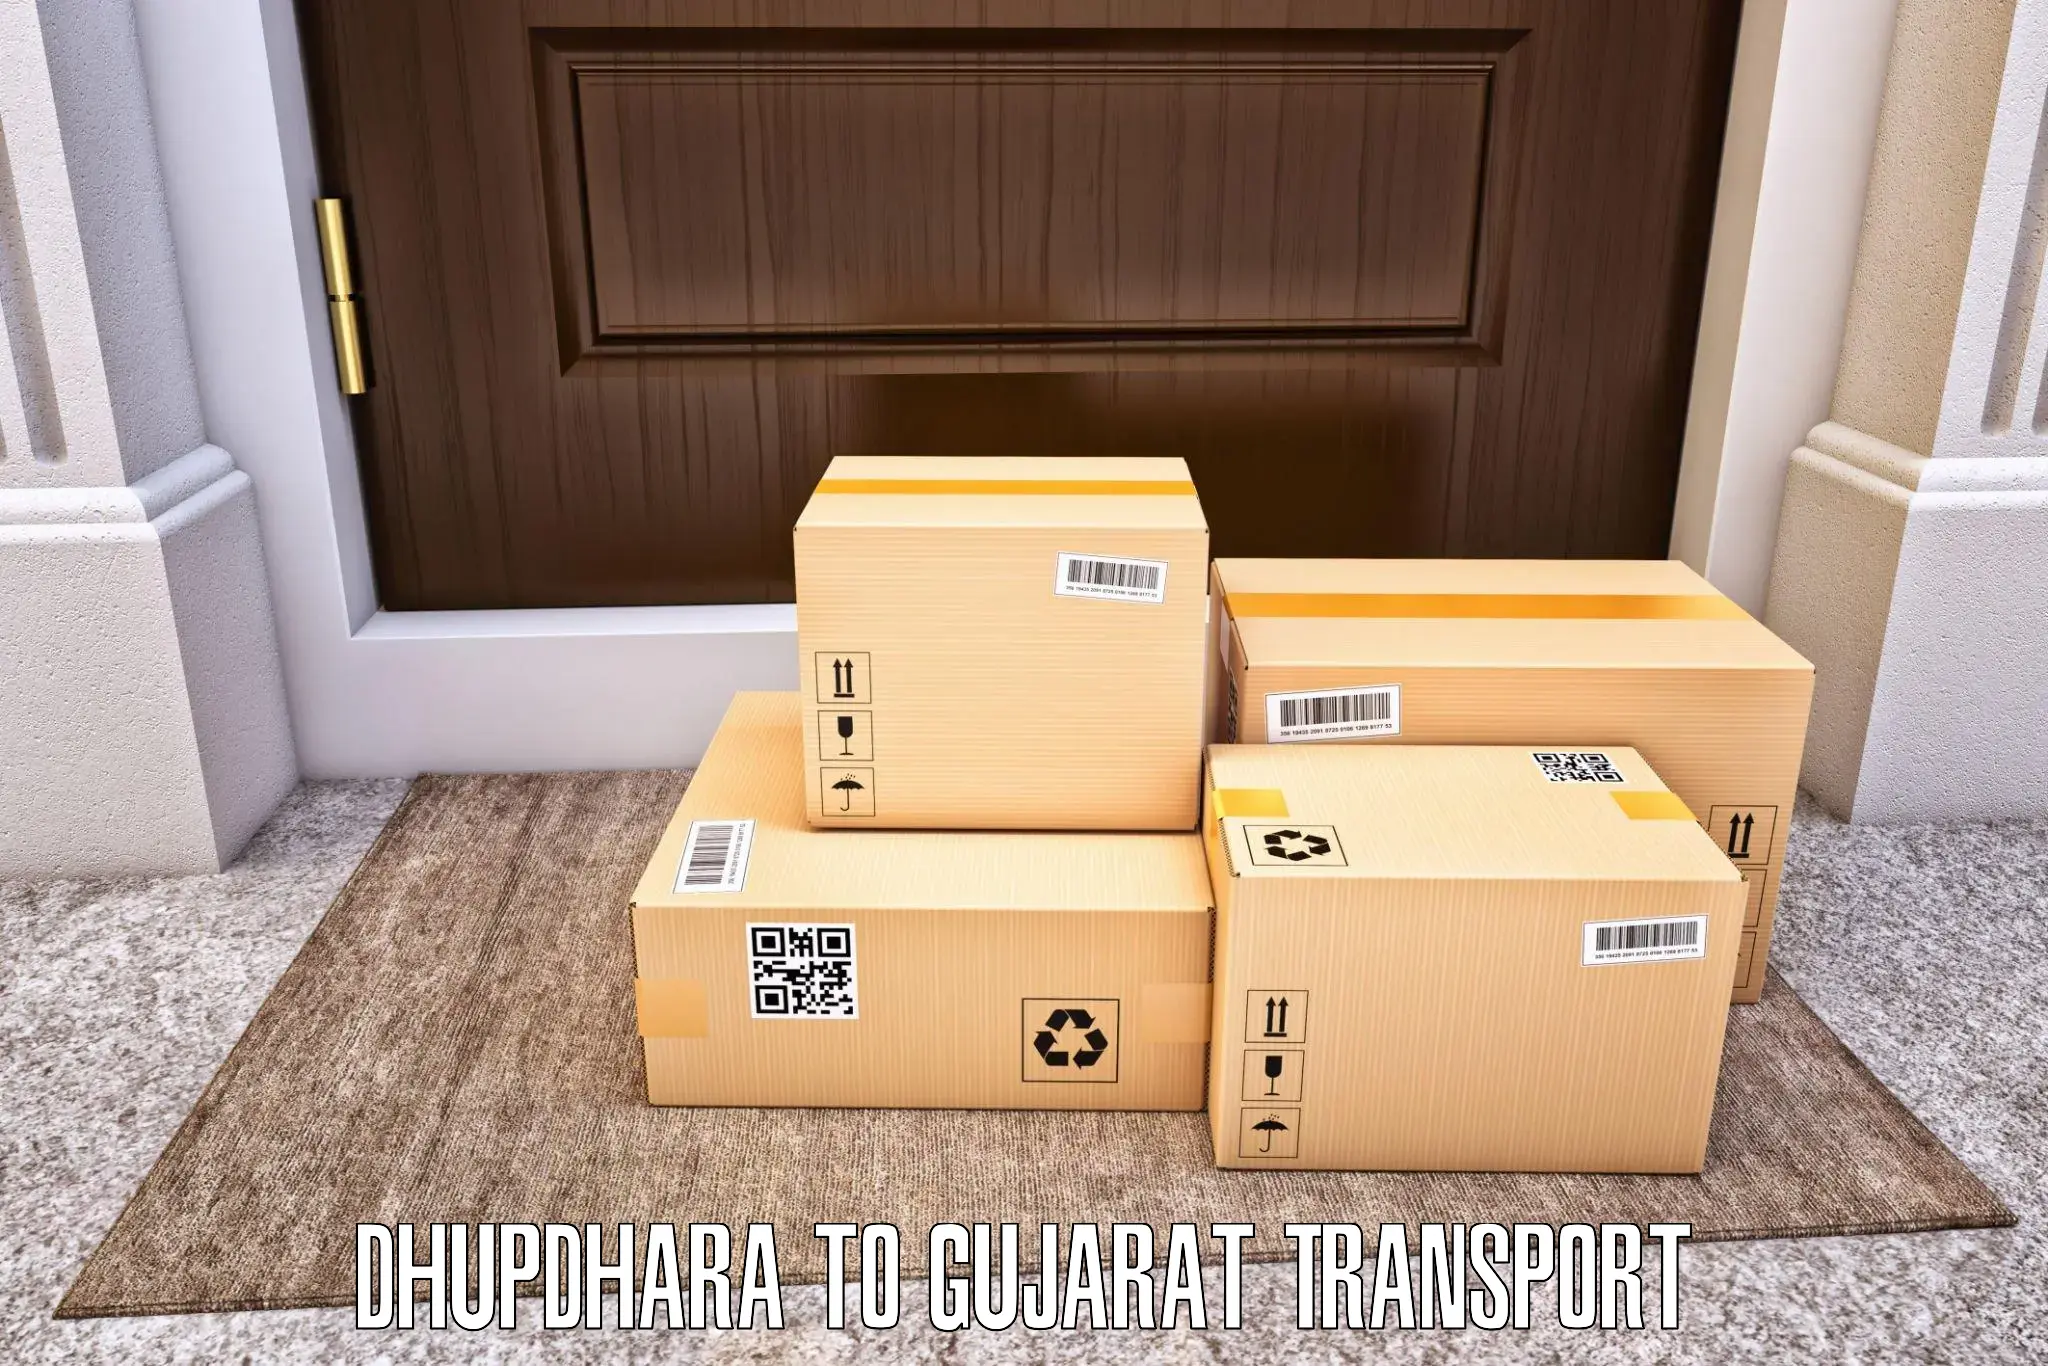 Intercity goods transport in Dhupdhara to Ahmedabad